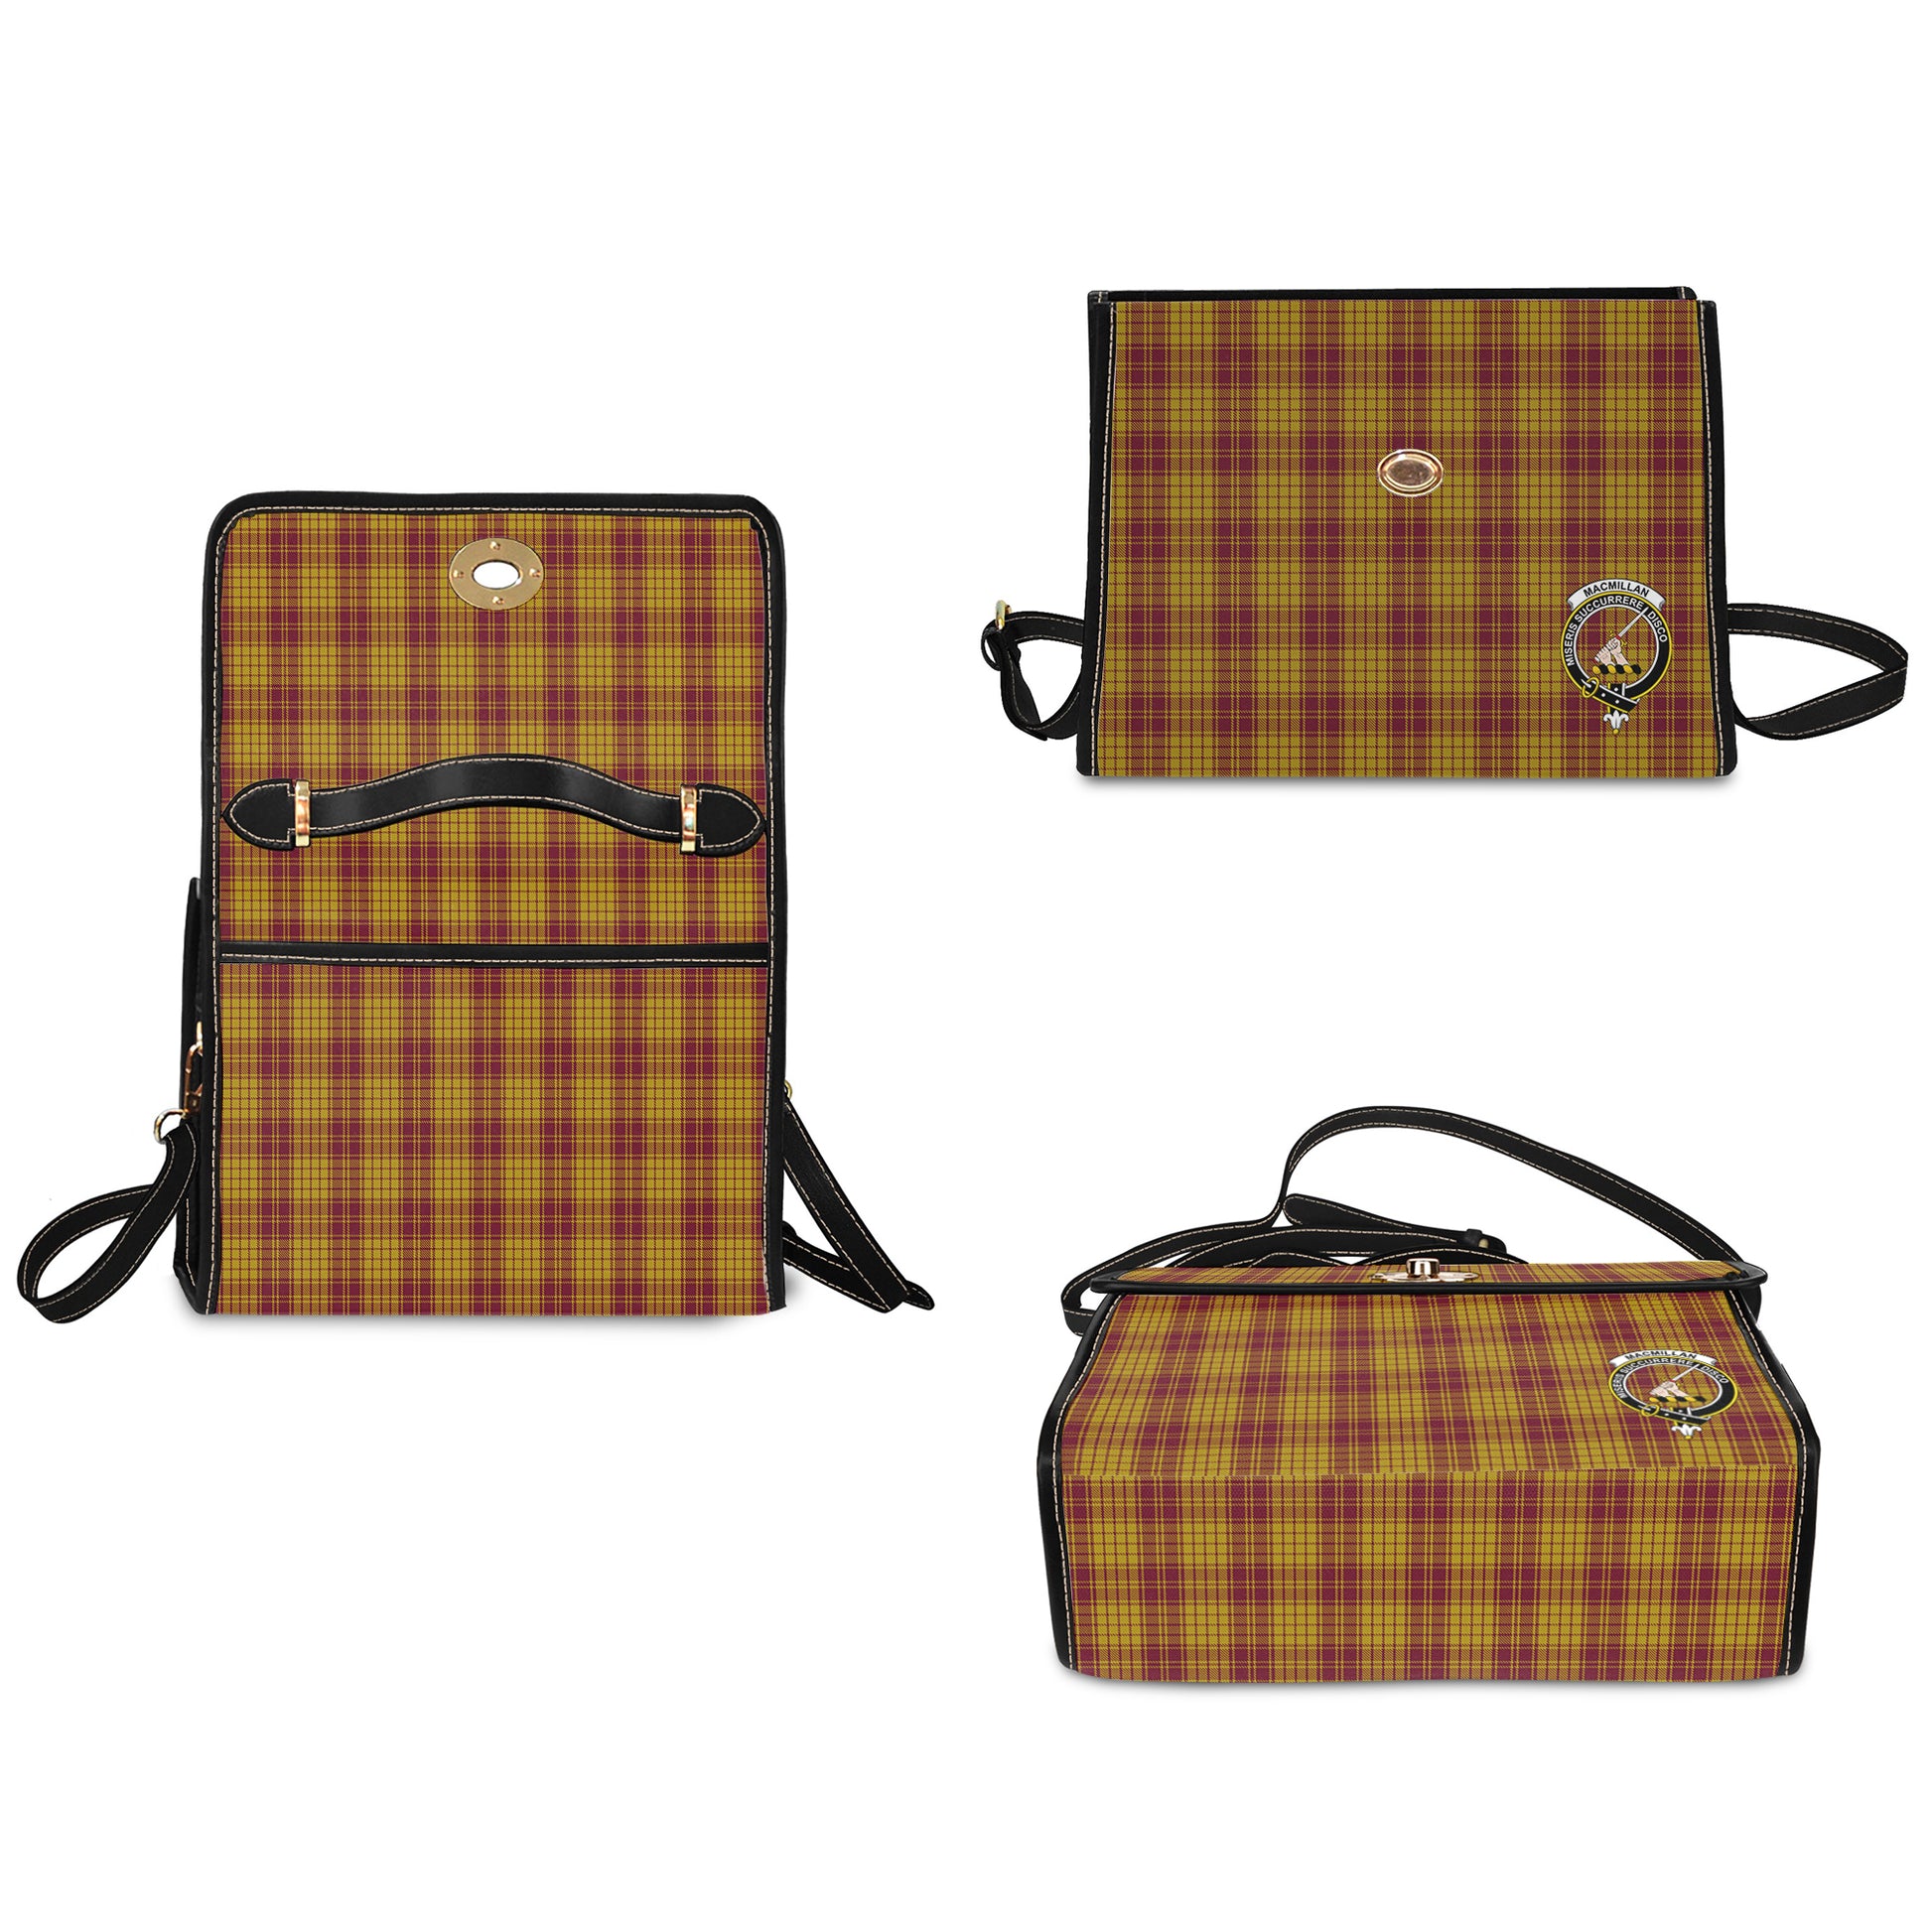 macmillan-dress-tartan-leather-strap-waterproof-canvas-bag-with-family-crest